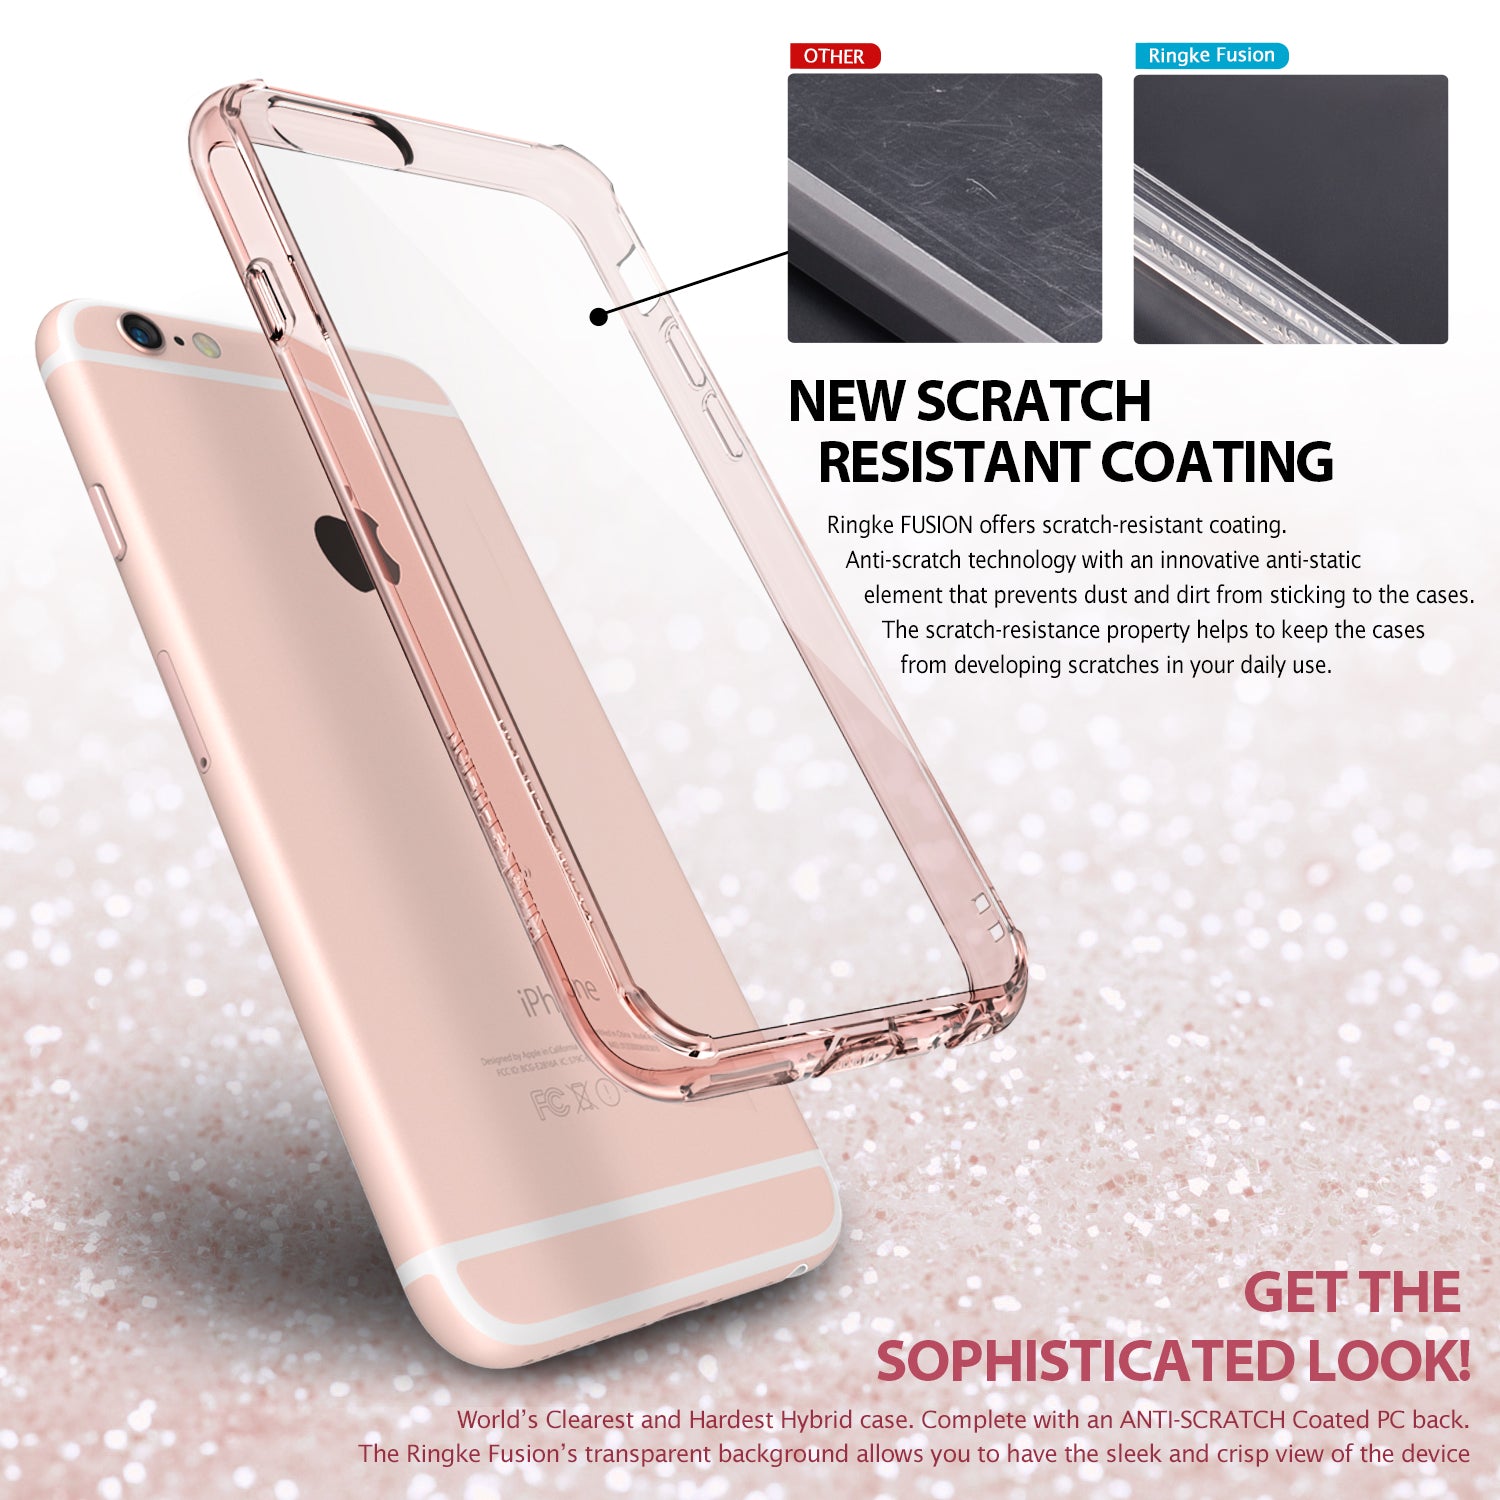 iPhone 6s Plus Case | Fusion - New Scratch Resistant Coating